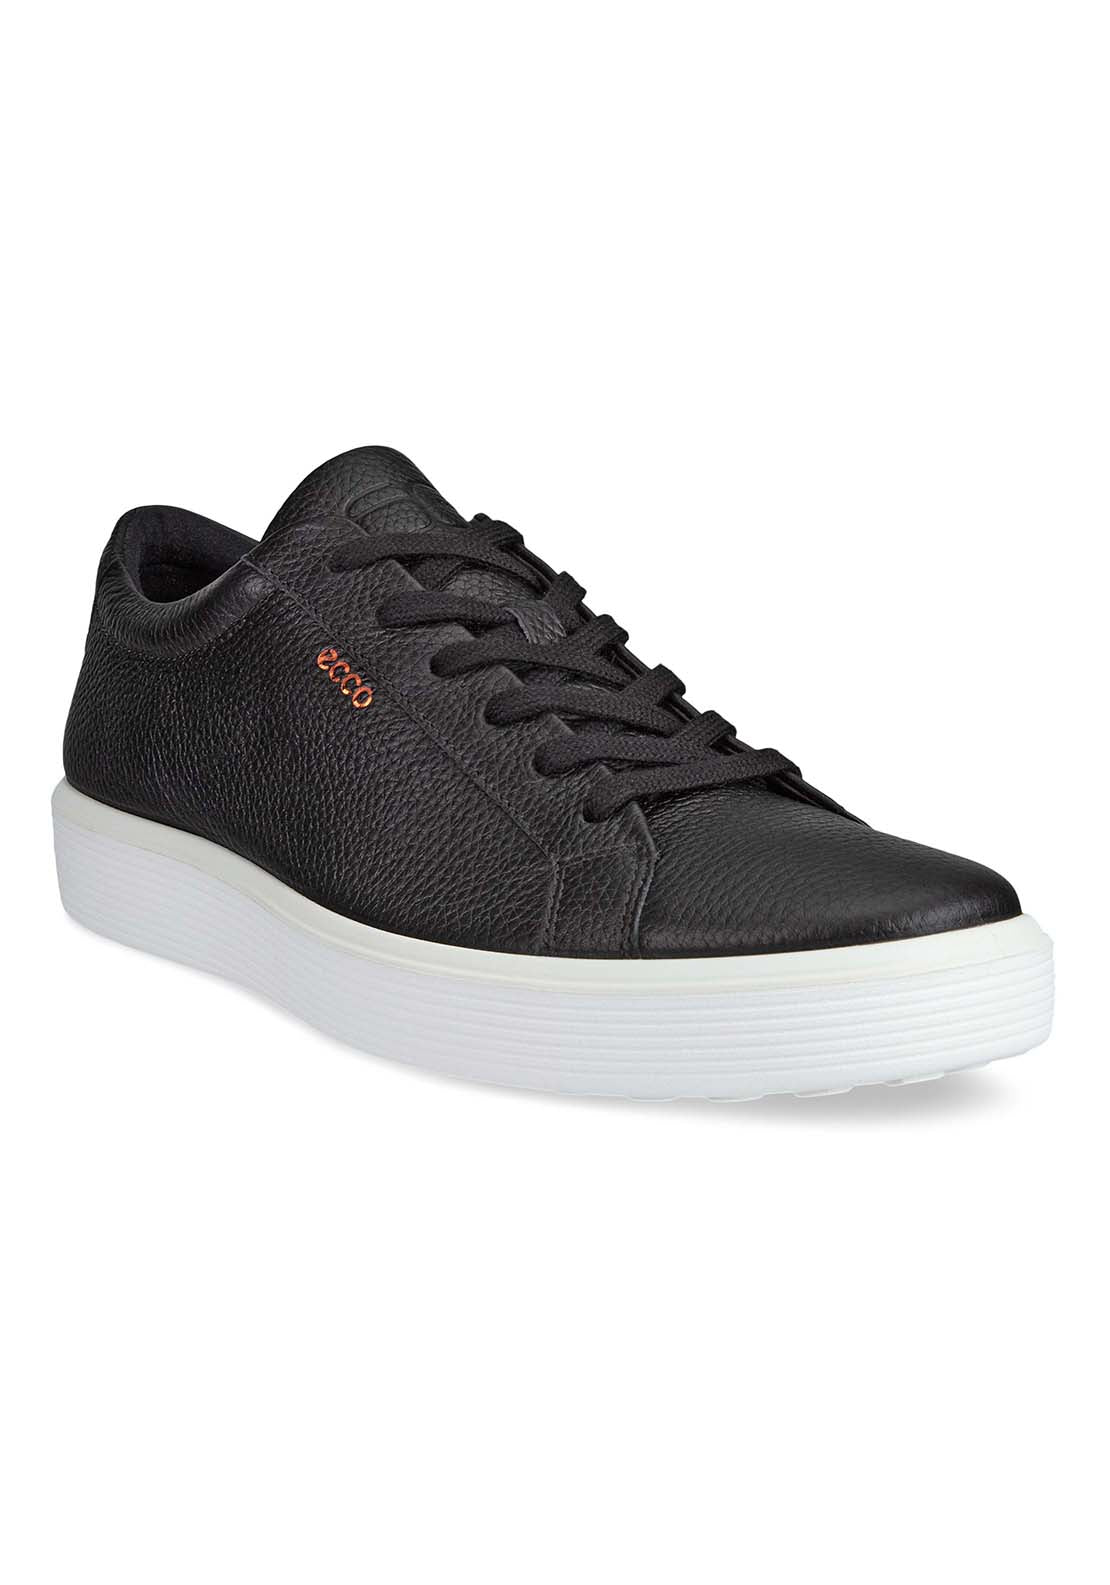 Ecco Soft 60 Casual Lace-Up 1 Shaws Department Stores